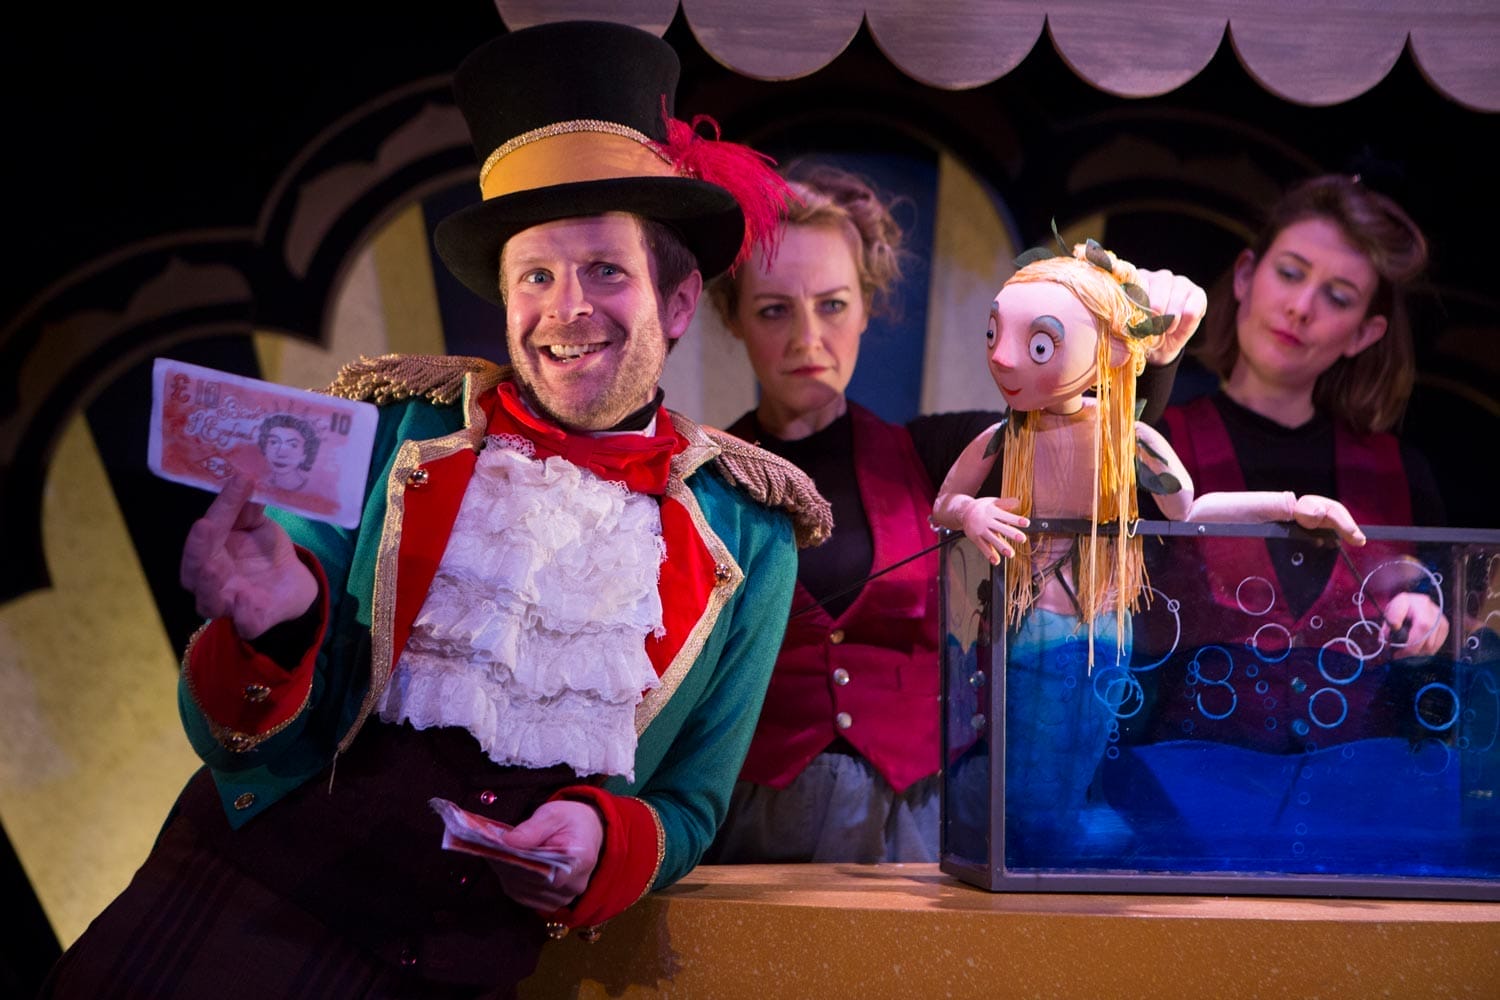 An actor dressed as Sam Sly holds up some money next to the Singing Mermaid puppet in her tank. Two puppeteers can be seen in the background.